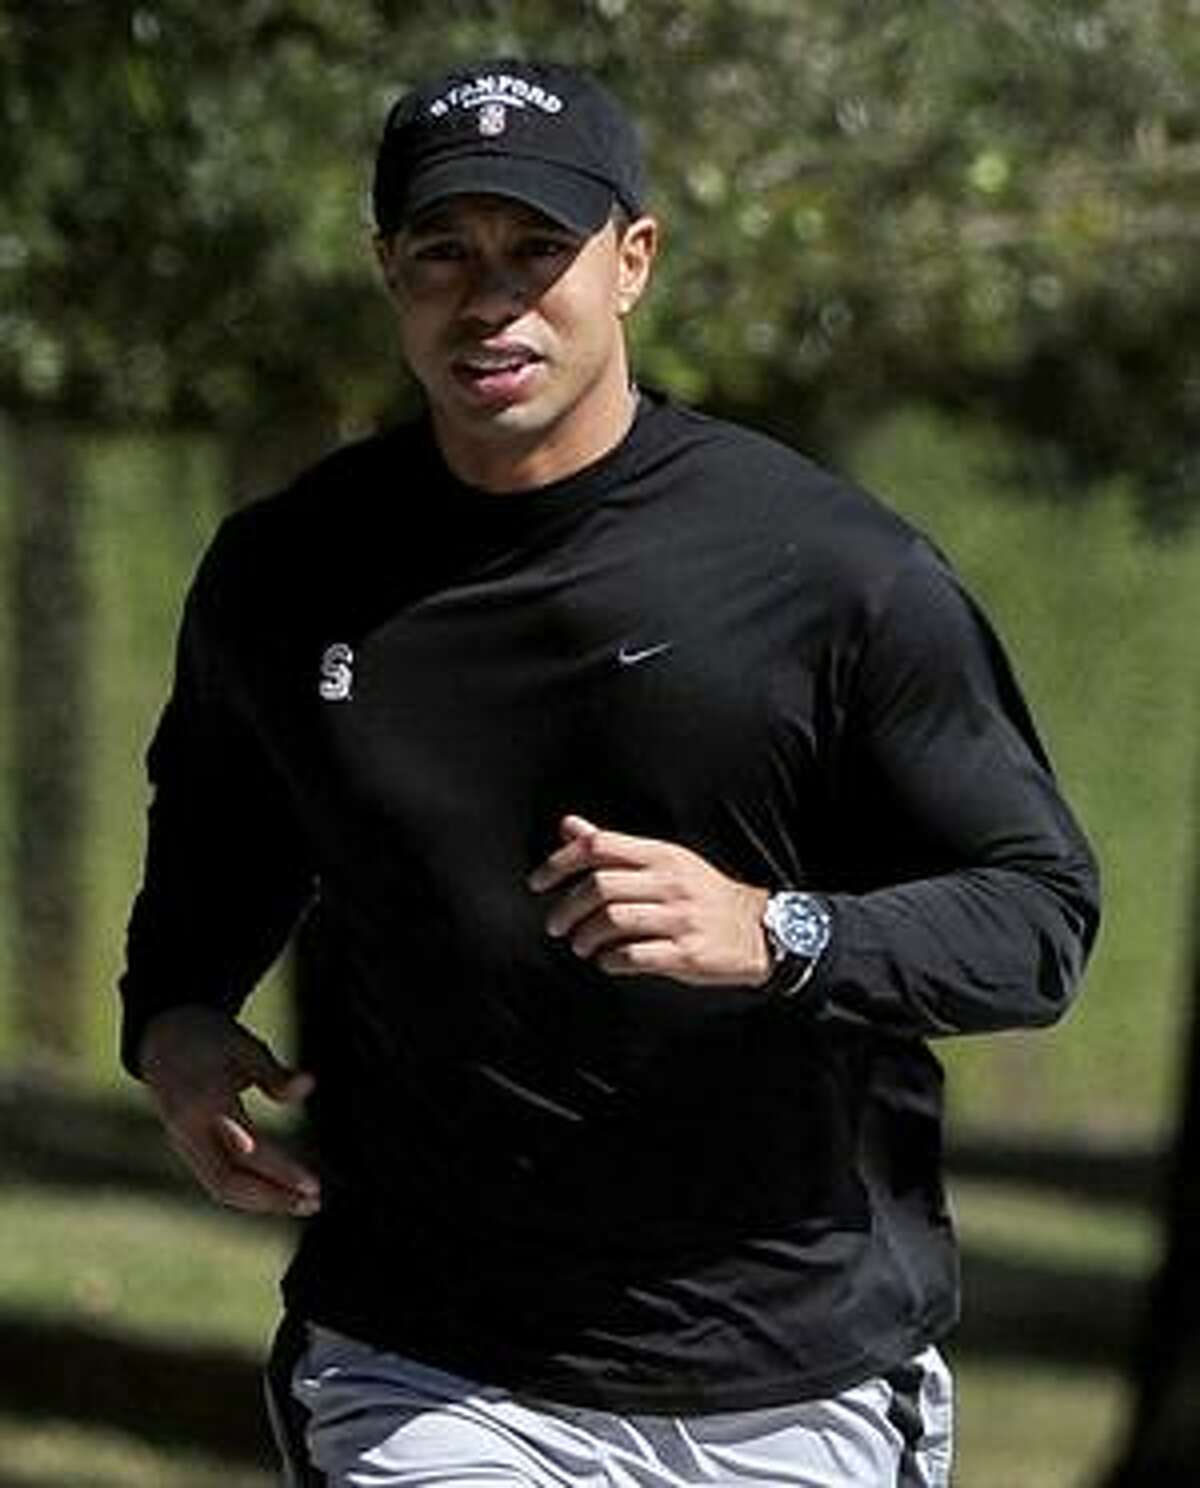 AP Tiger Woods jogs near his home Wednesday in Windermere, Fla. Woods will end nearly three months of silence Friday when he speaks publicly for the first time since his middle-of-the-night car accident sparked stunning revelations of infidelity. It will be Woods' first public appearance since Nov. 27, 2009.